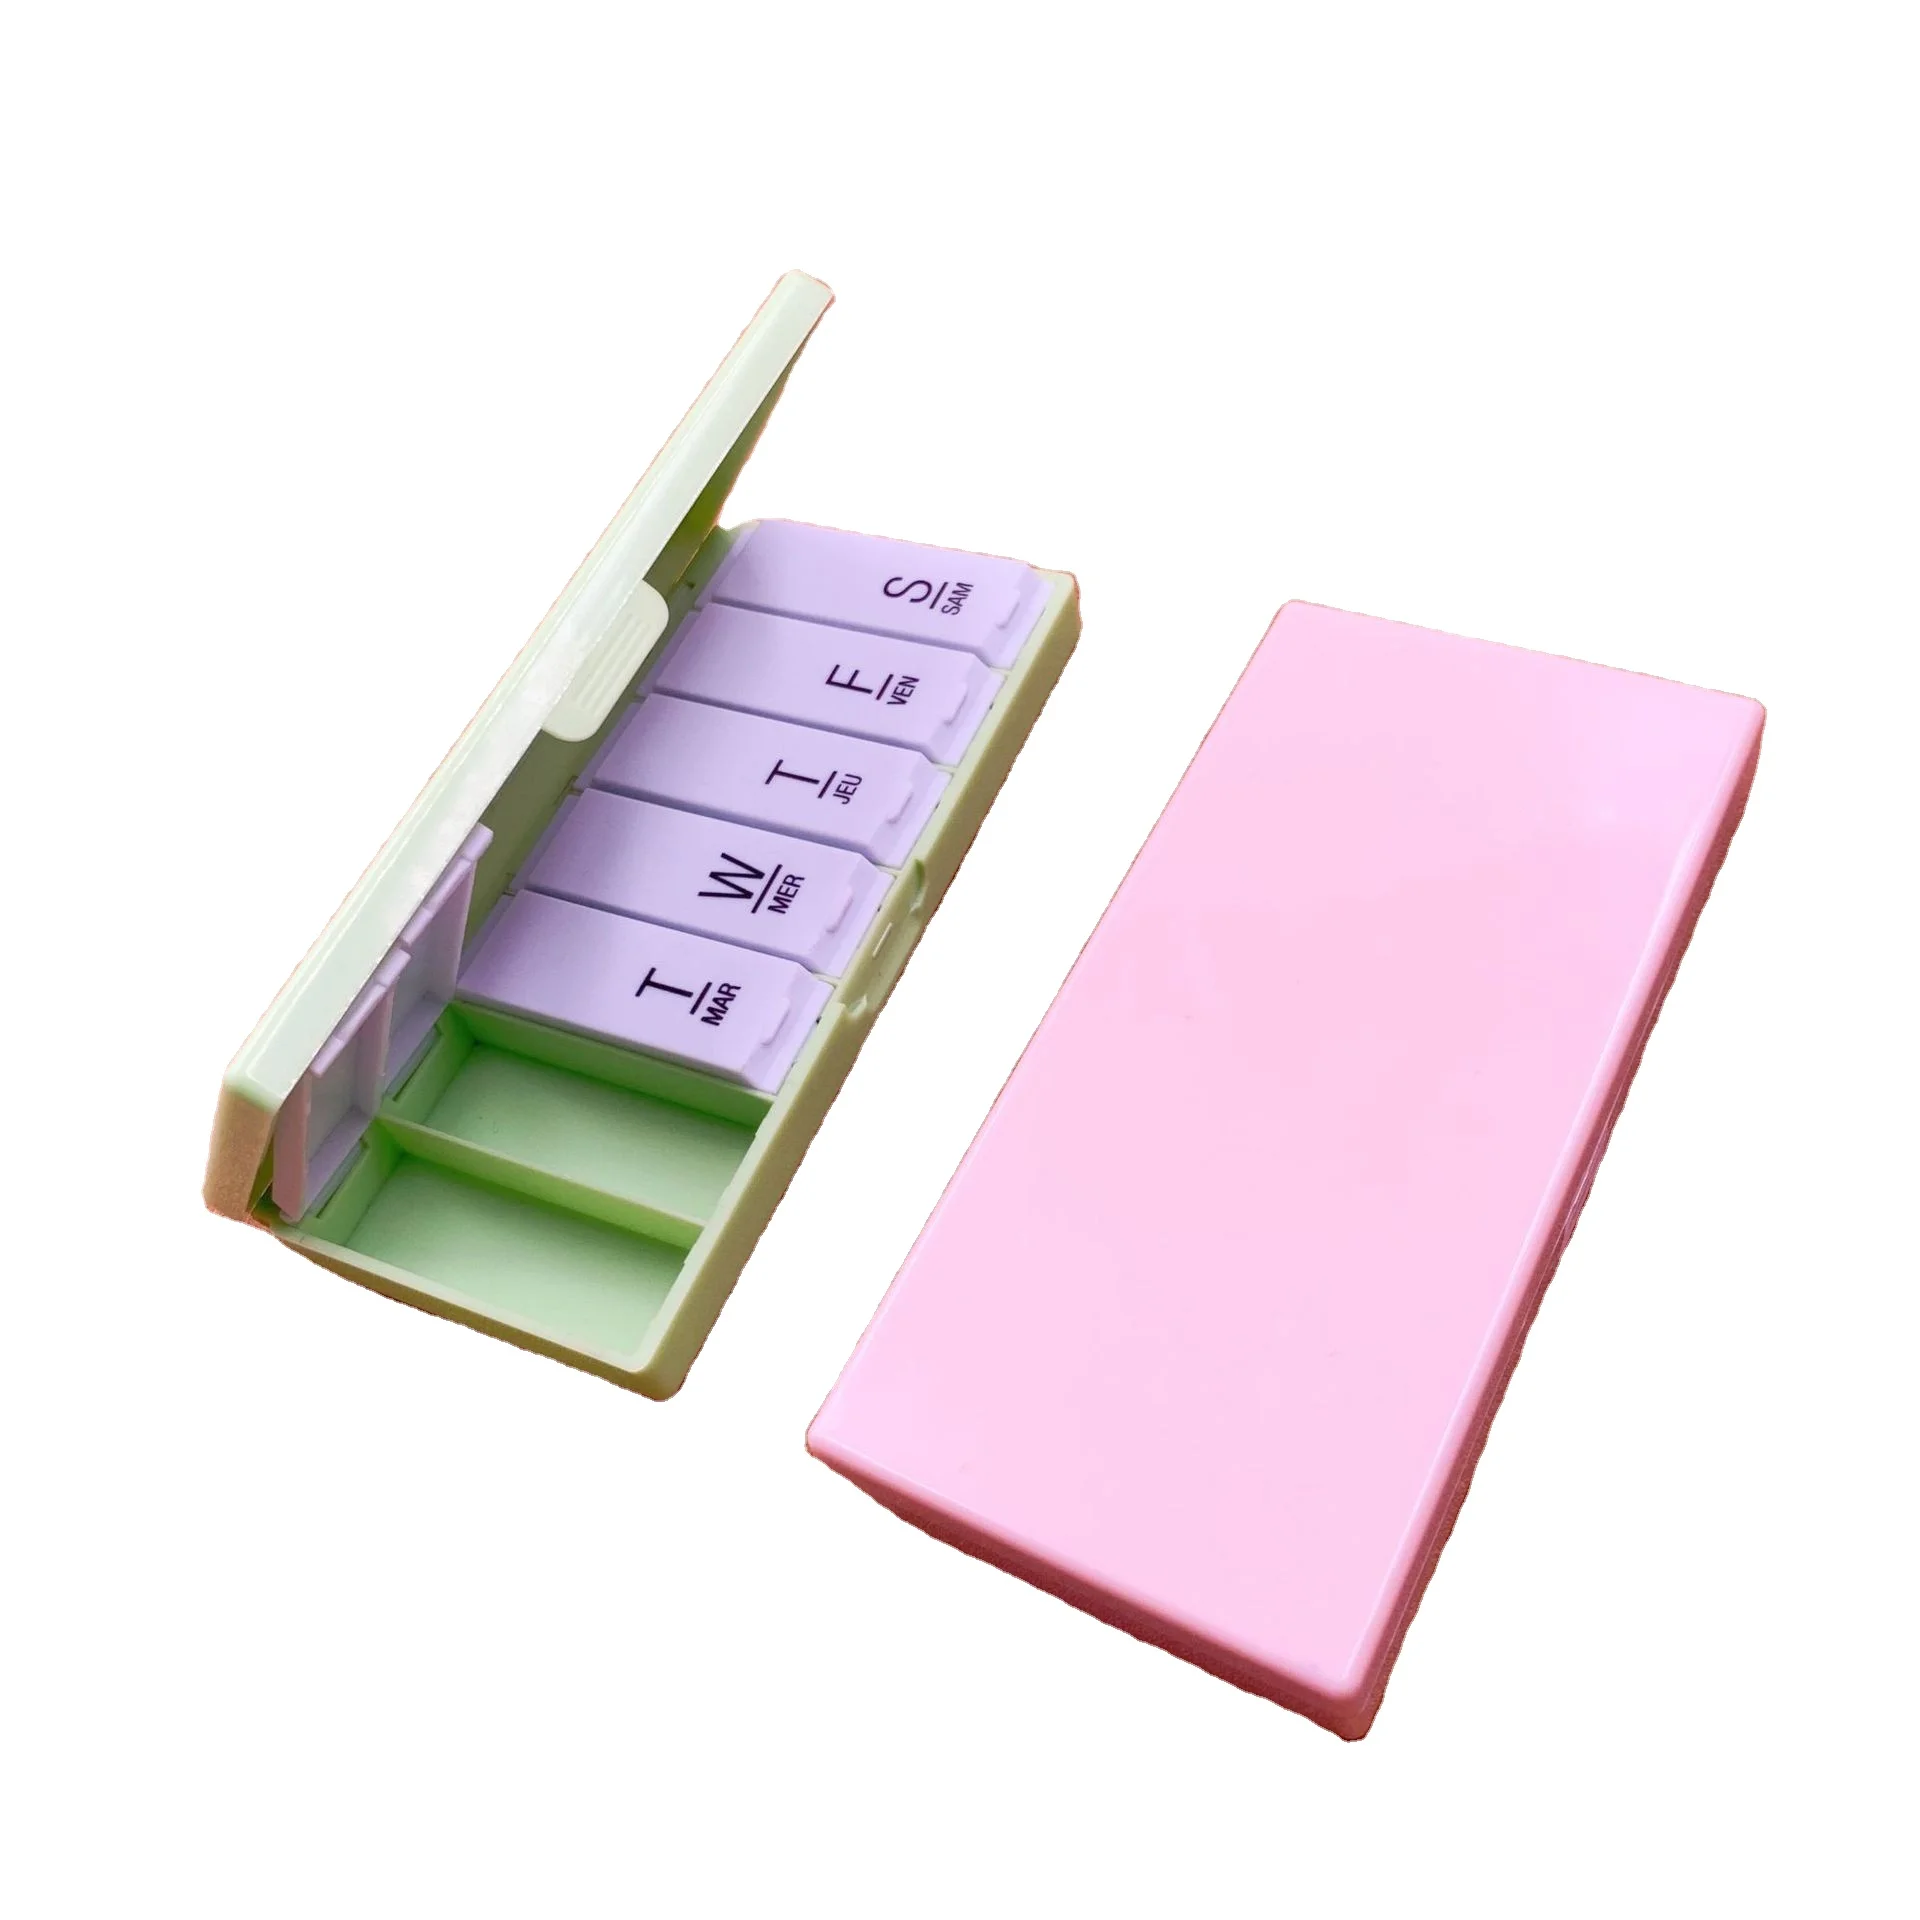 Plastic organizer tablet storage cases Customize logo 7 compartment days weekly pill box with mirror